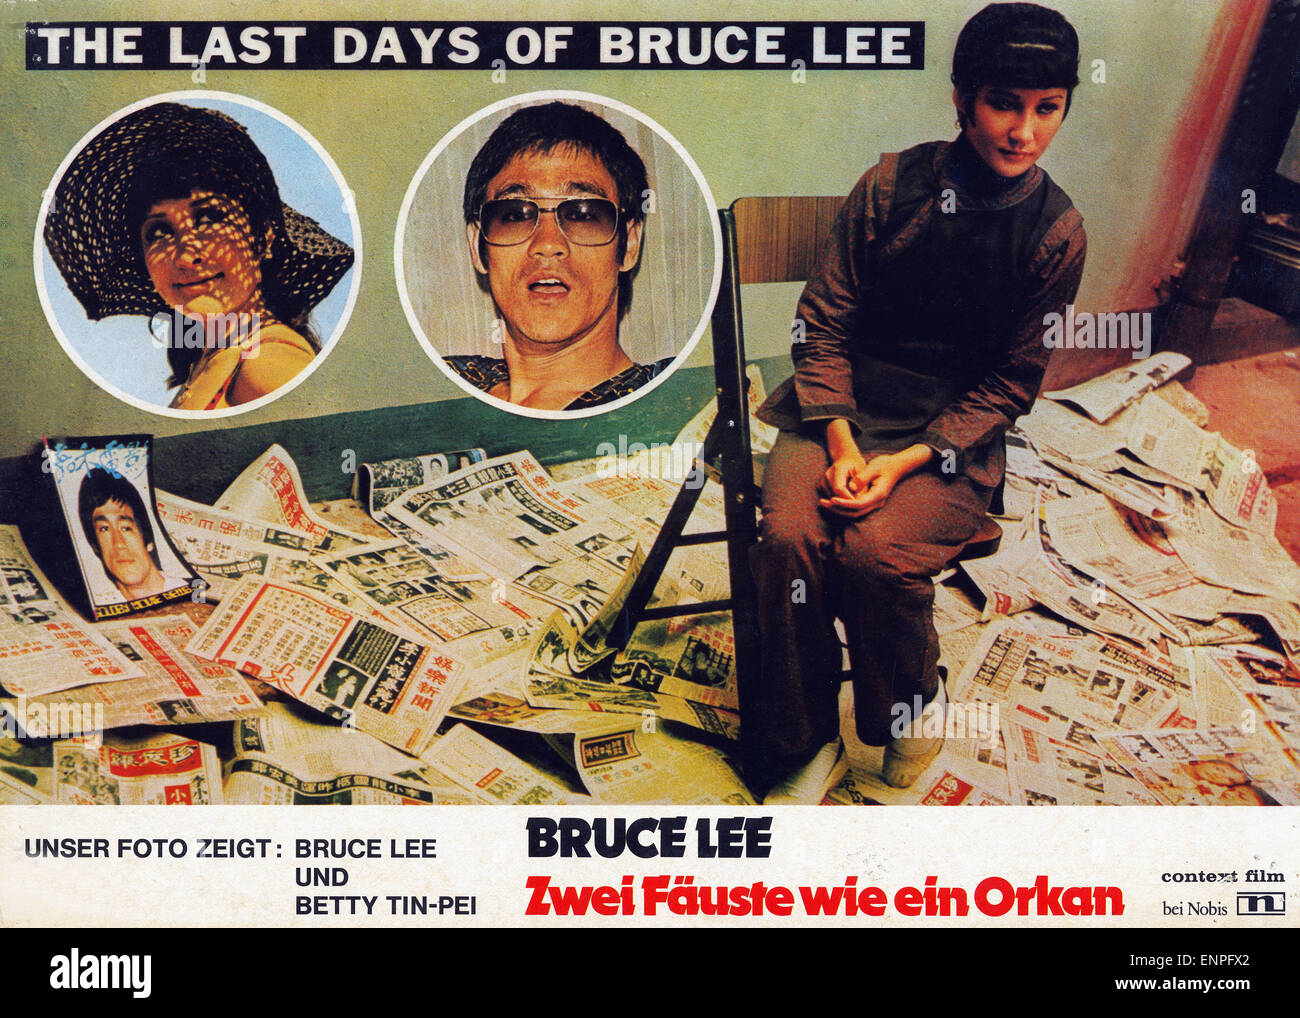 the last days of bruce lee